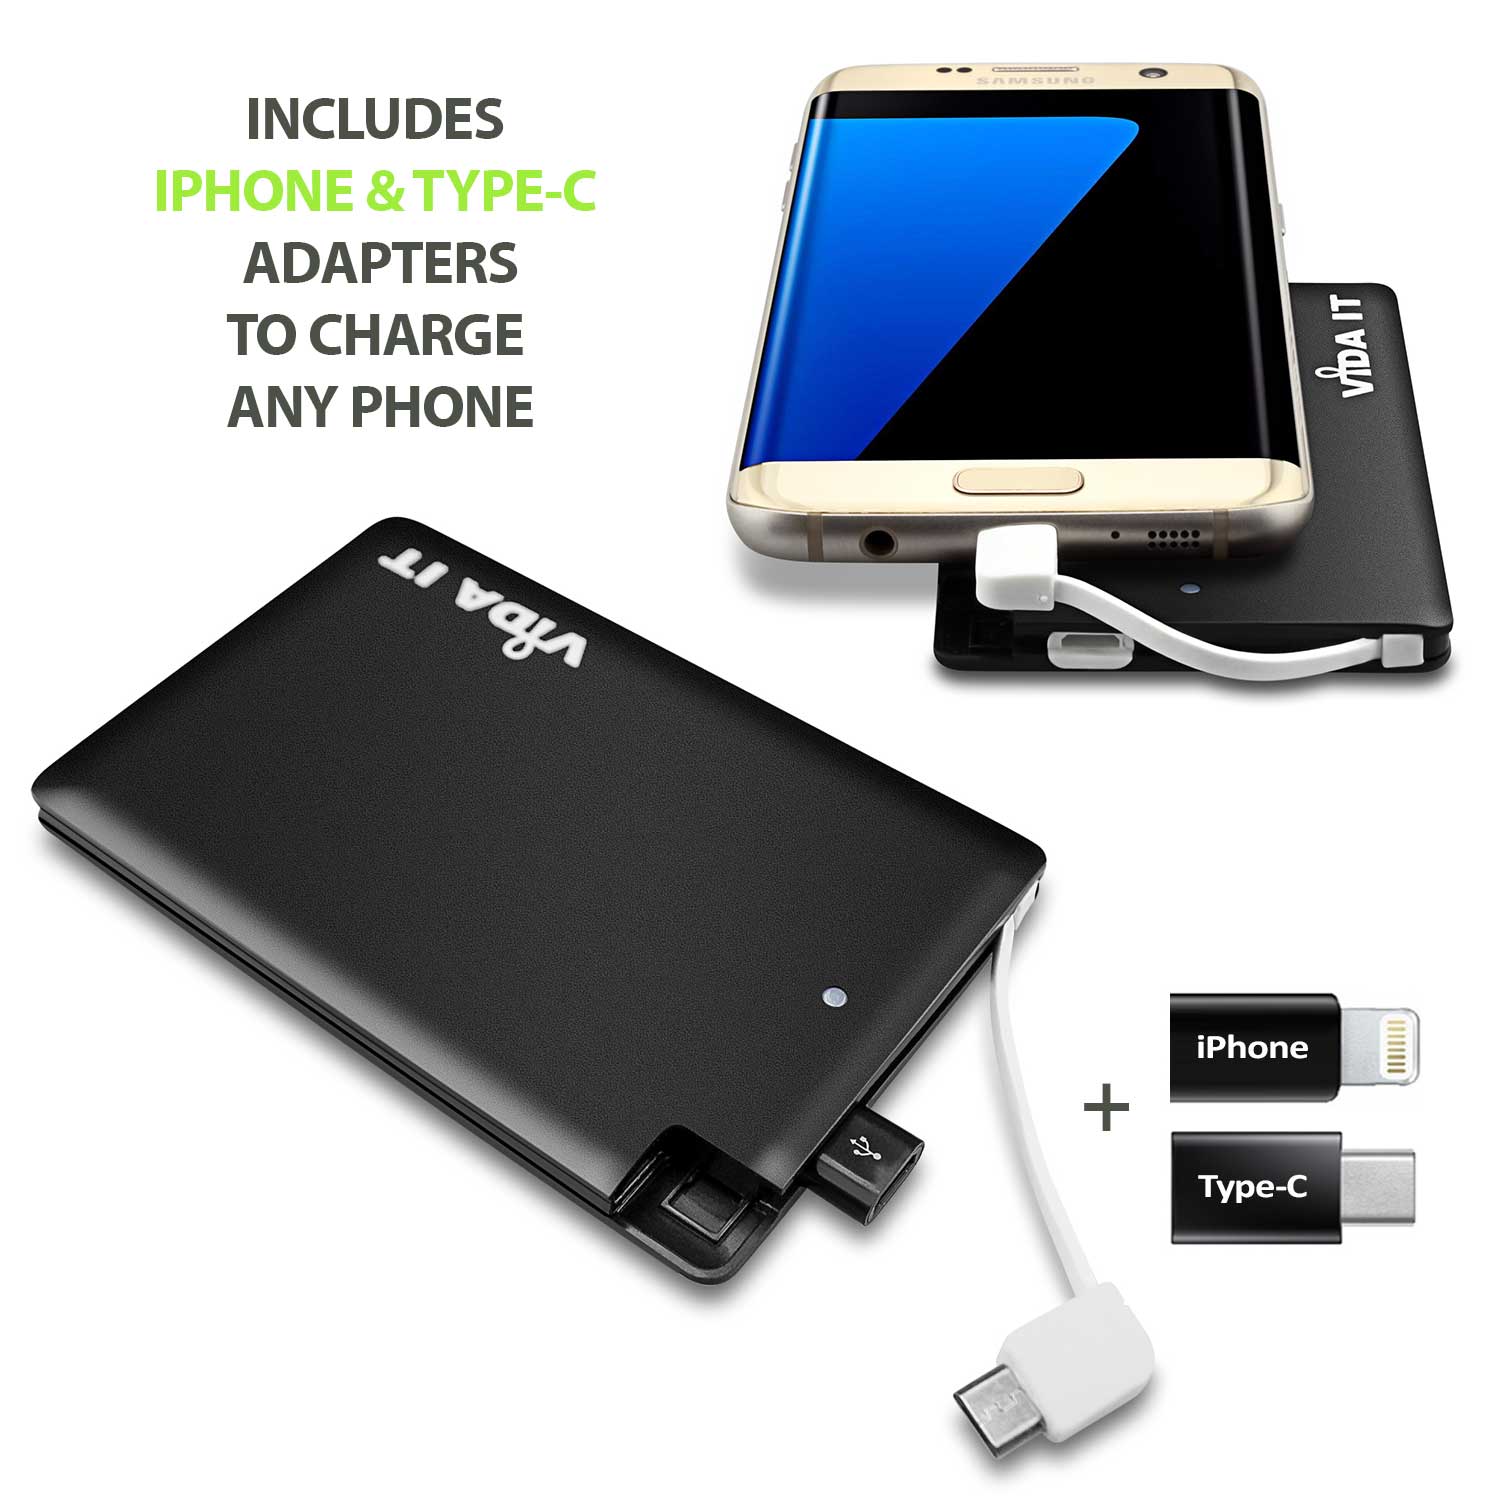 Slim credit card design Power Bank 2500mAh external battery pack thin portable USB charger with built-in micro-usb charging cable plus two adapters for iPhone and type-C usb-c connectors for mobile phone smartphone tablet pc